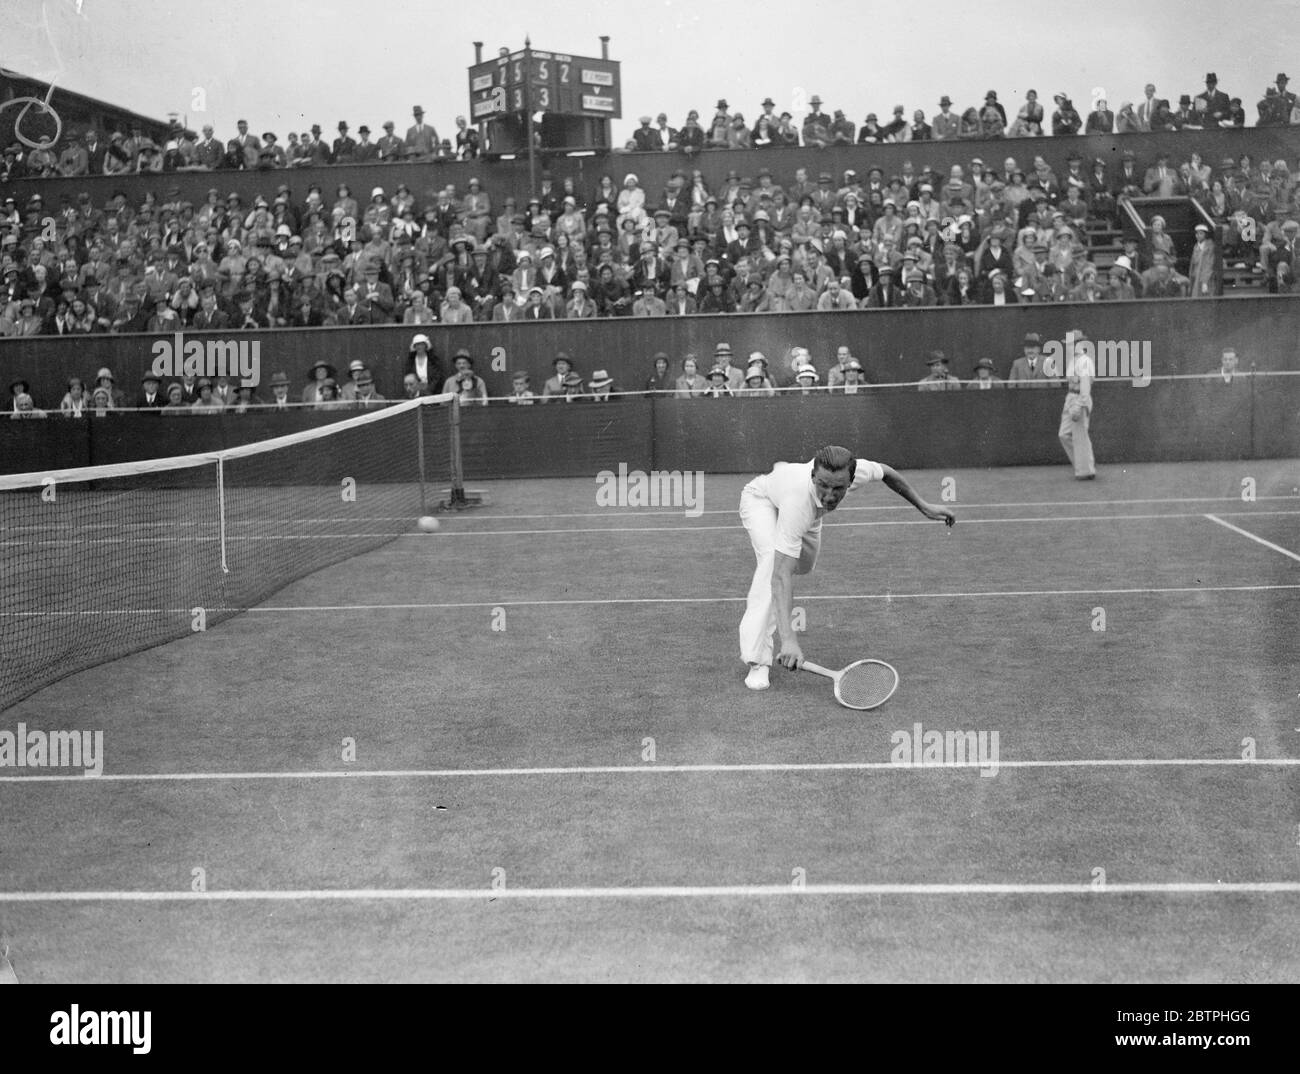 Wimbledon tennis championships . F J Perry beat G O Jameson in the singles of the Wimbledon tennis Championships . F J Perry getting down to a low shot during the match . 20 June 1932 Stock Photo